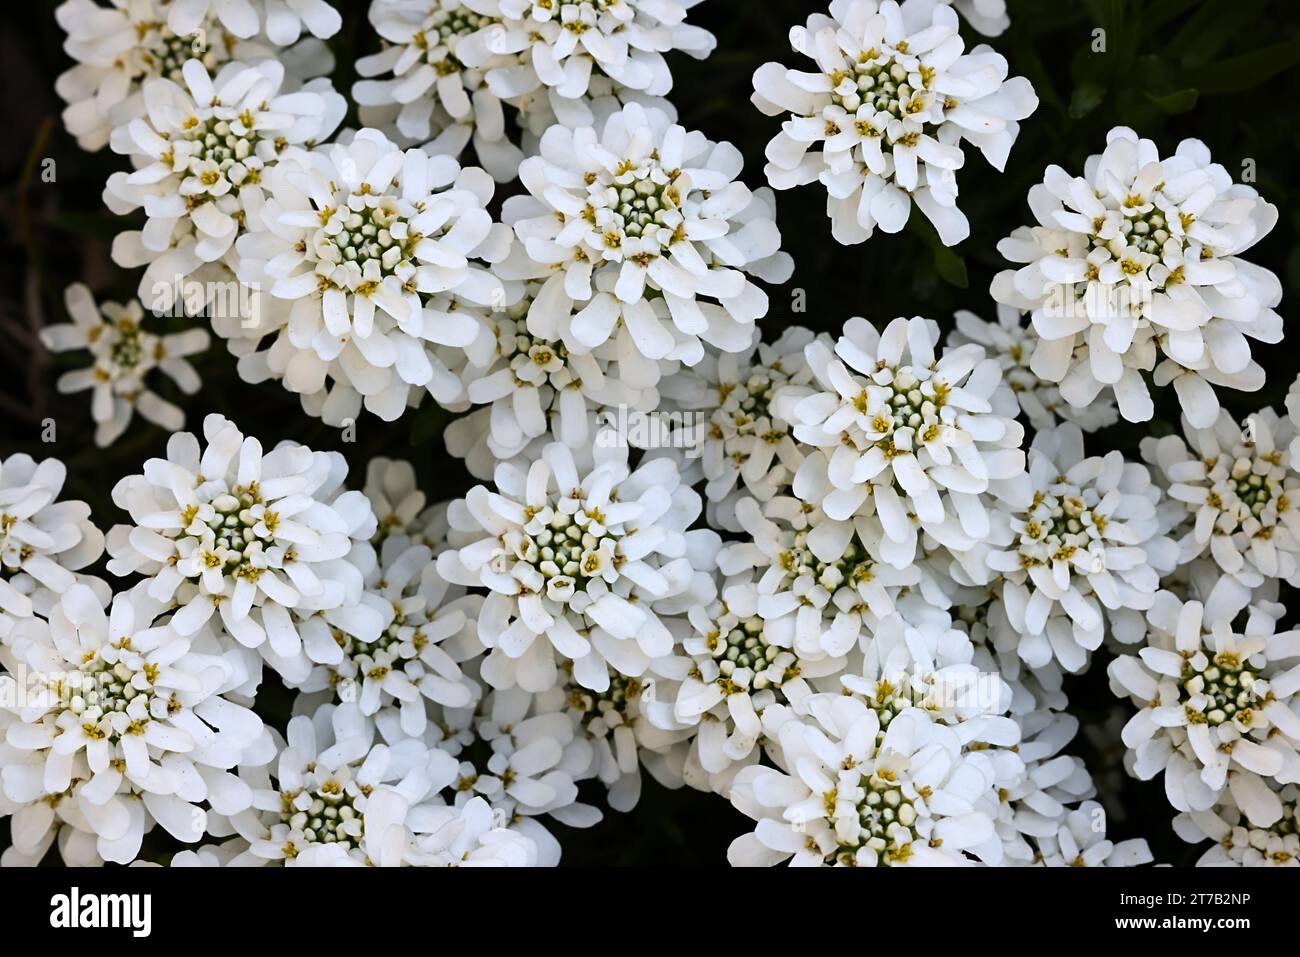 Iberis sempervirens, the evergreen candytuft or perennial candytuft, an early spring flower Stock Photo